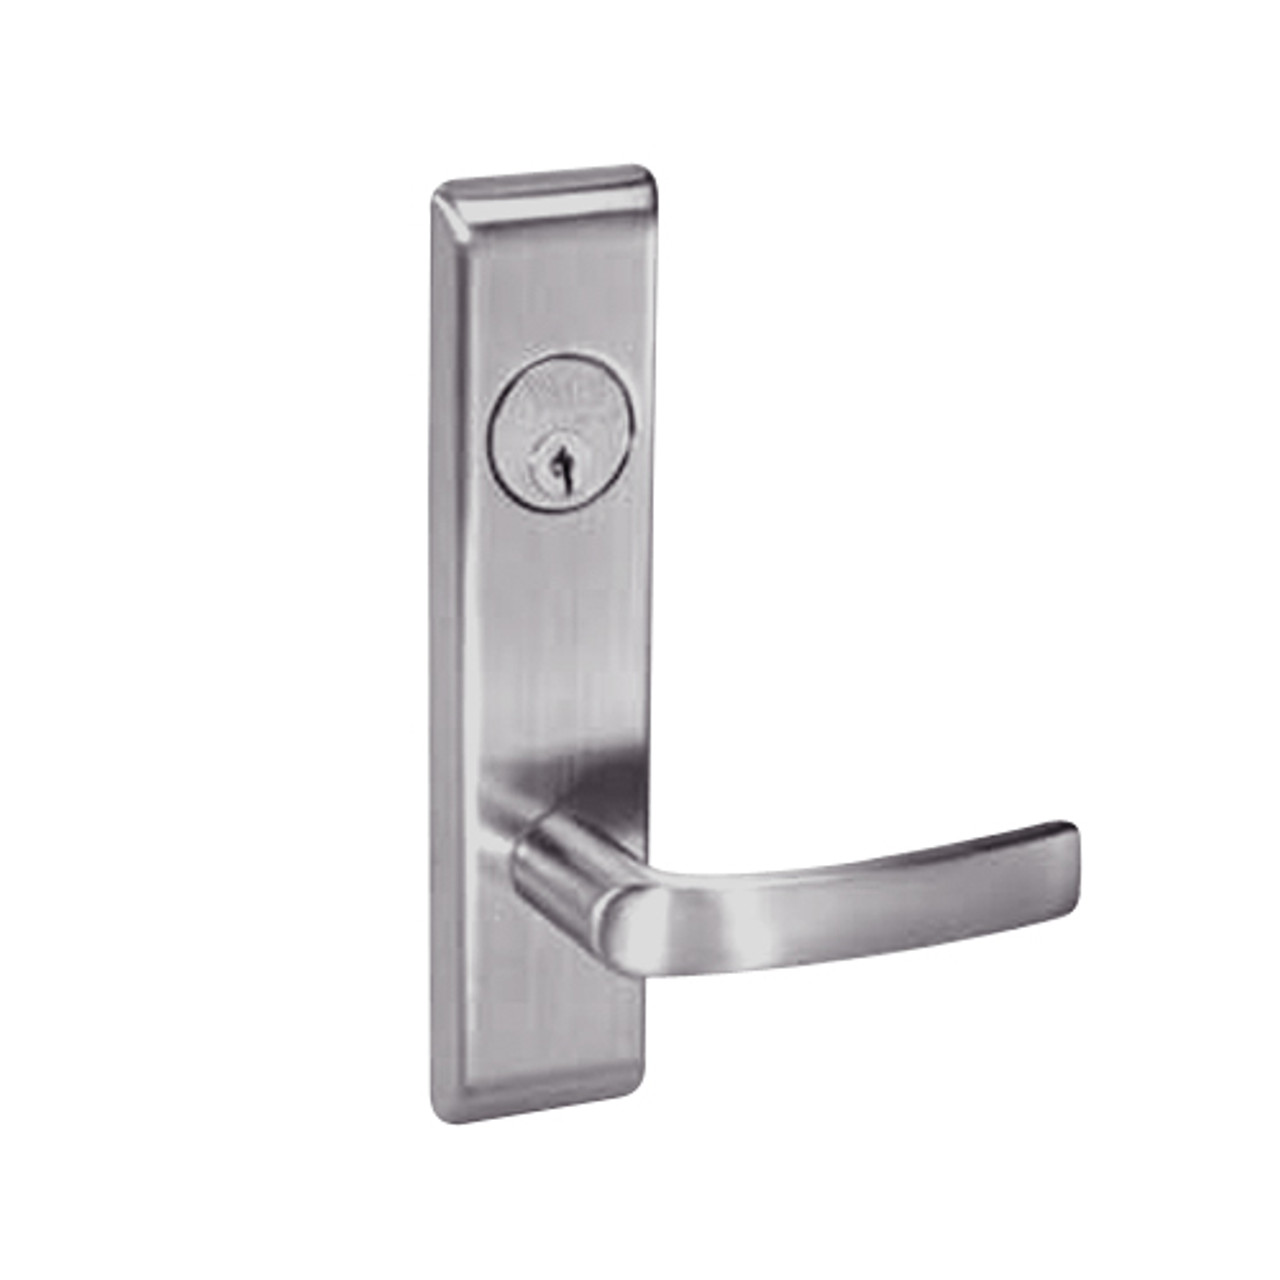 MOCN8811-2FL-630 Yale 8800FL Series Double Cylinder Mortise Classroom Deadbolt Locks with Monroe Lever in Satin Stainless Steel